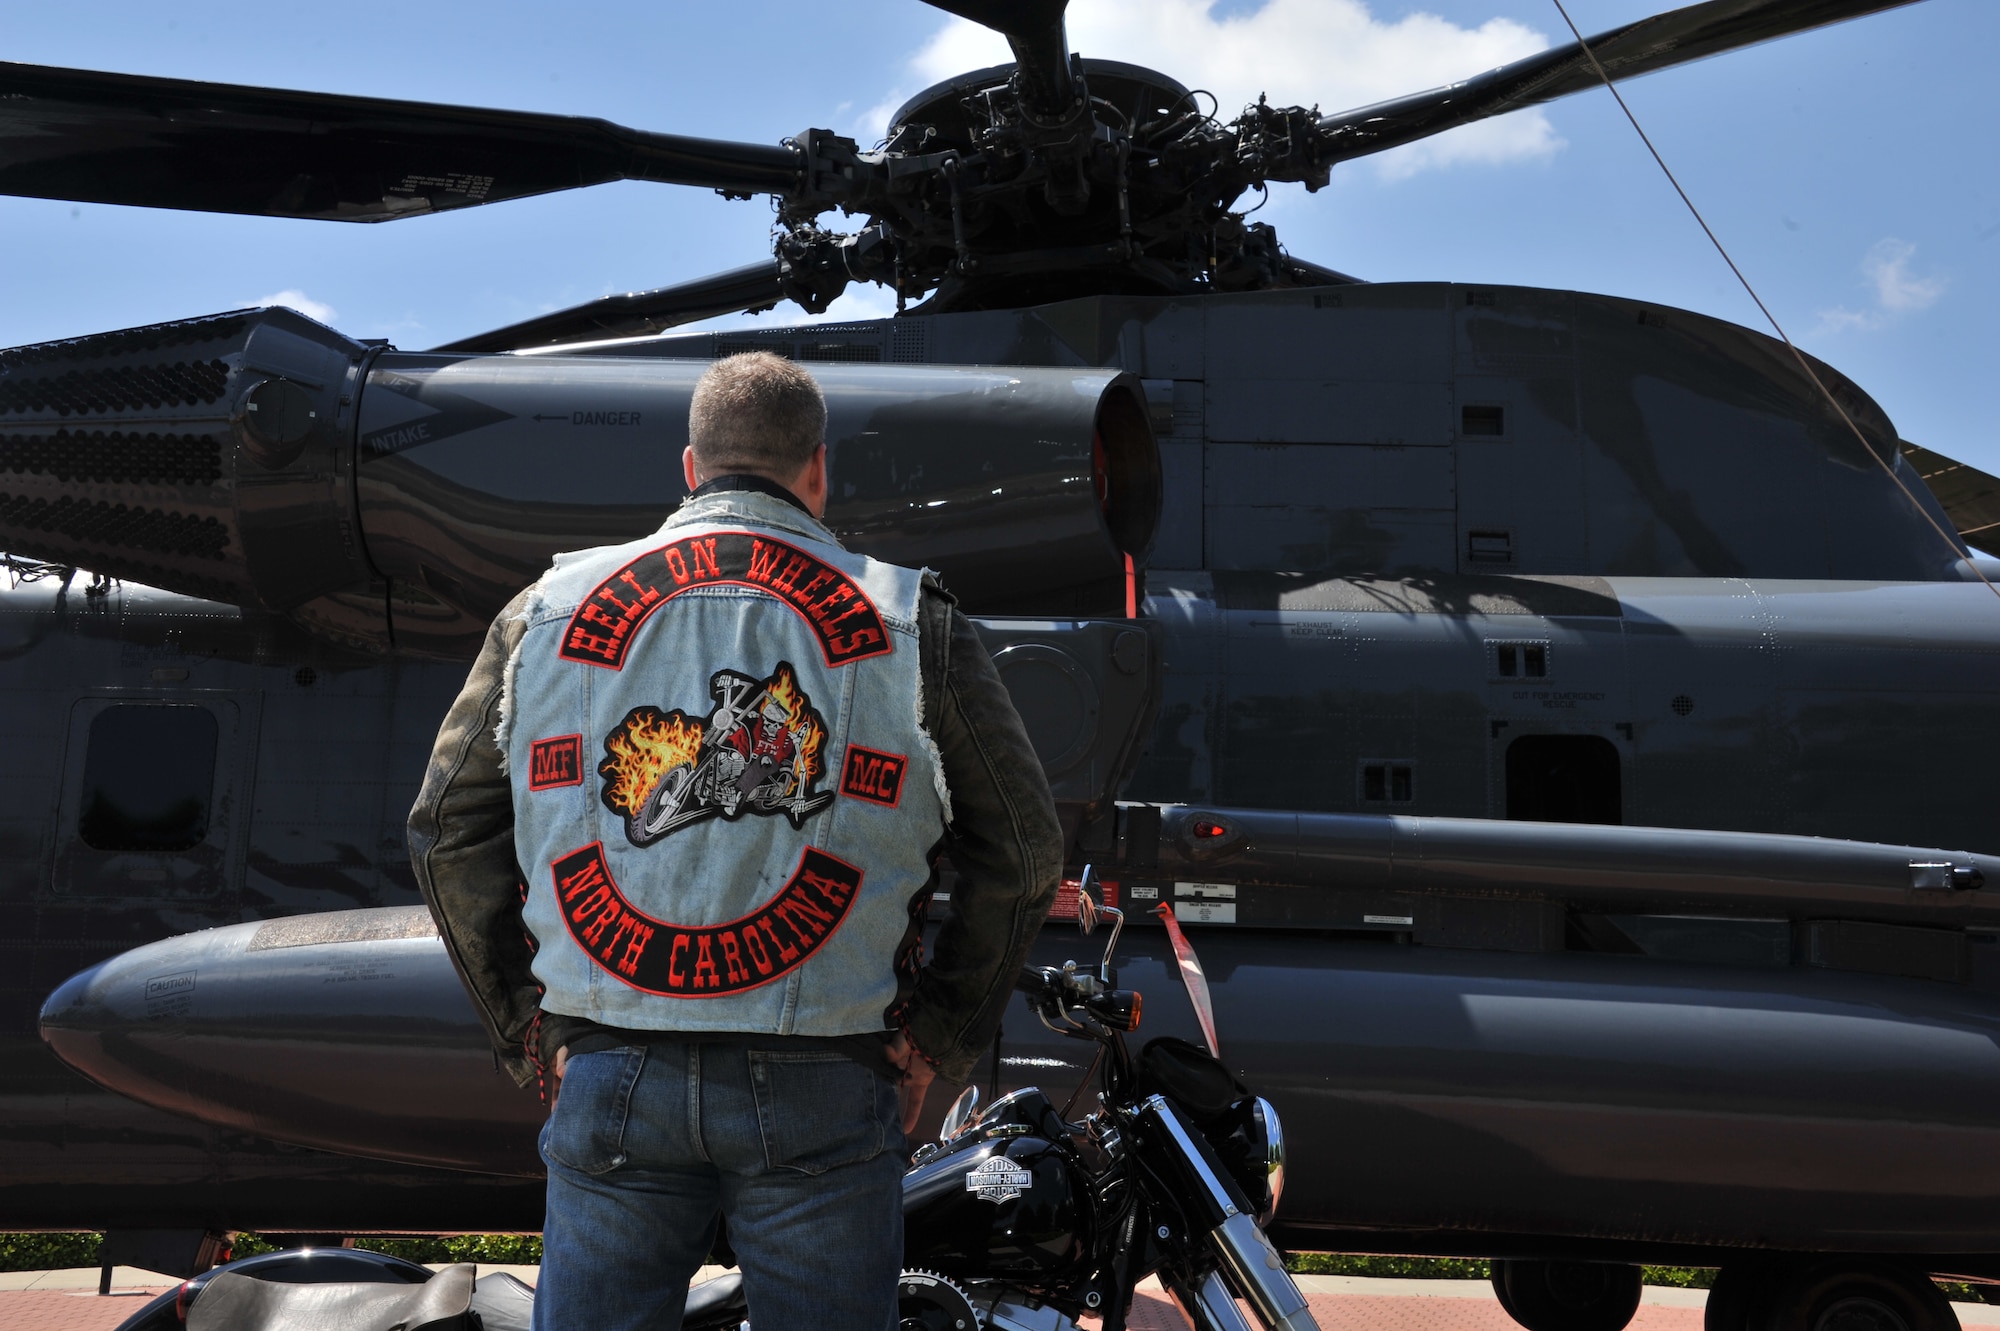 William Dulaney, professor of organizational communication at the Air Force Culture and Language Center, and a faculty member of the Air University Air War College, looks at an HH-53 Super Jolly Green Giant static display on his Harley, at Maxwell Air Force Base. Dulaney spent his military career in a variety of positions, including the Special Forces, and is a member of the Biker culture and a member of a motorcycle club. . He is getting ready to deploy for his third one-year tour in Afghanistan as an advisor to the U.S. military forces there on a mission to support the transition of operations and leadership to the Afghan government. (U.S. Air Force photo by Staff Sgt. Gregory Brook) 